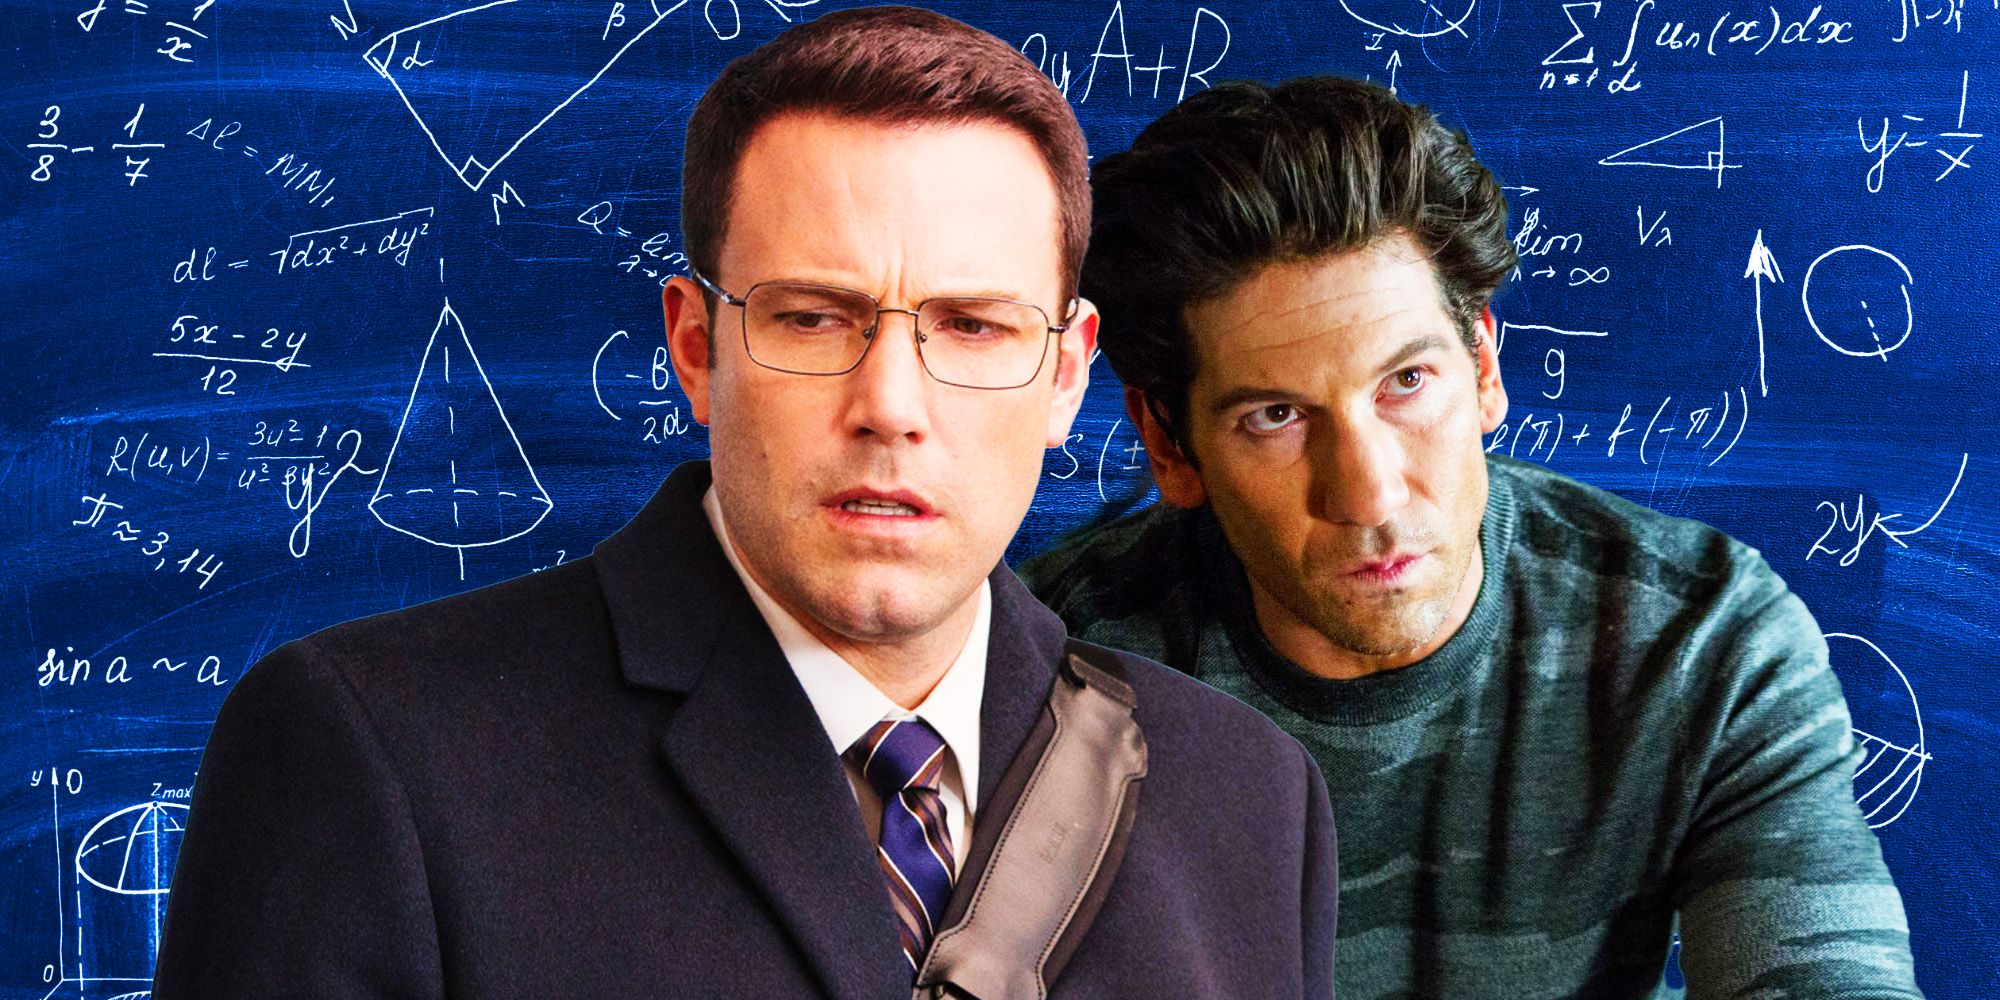 Ben Affleck and Jon Bernthal from The Accountant